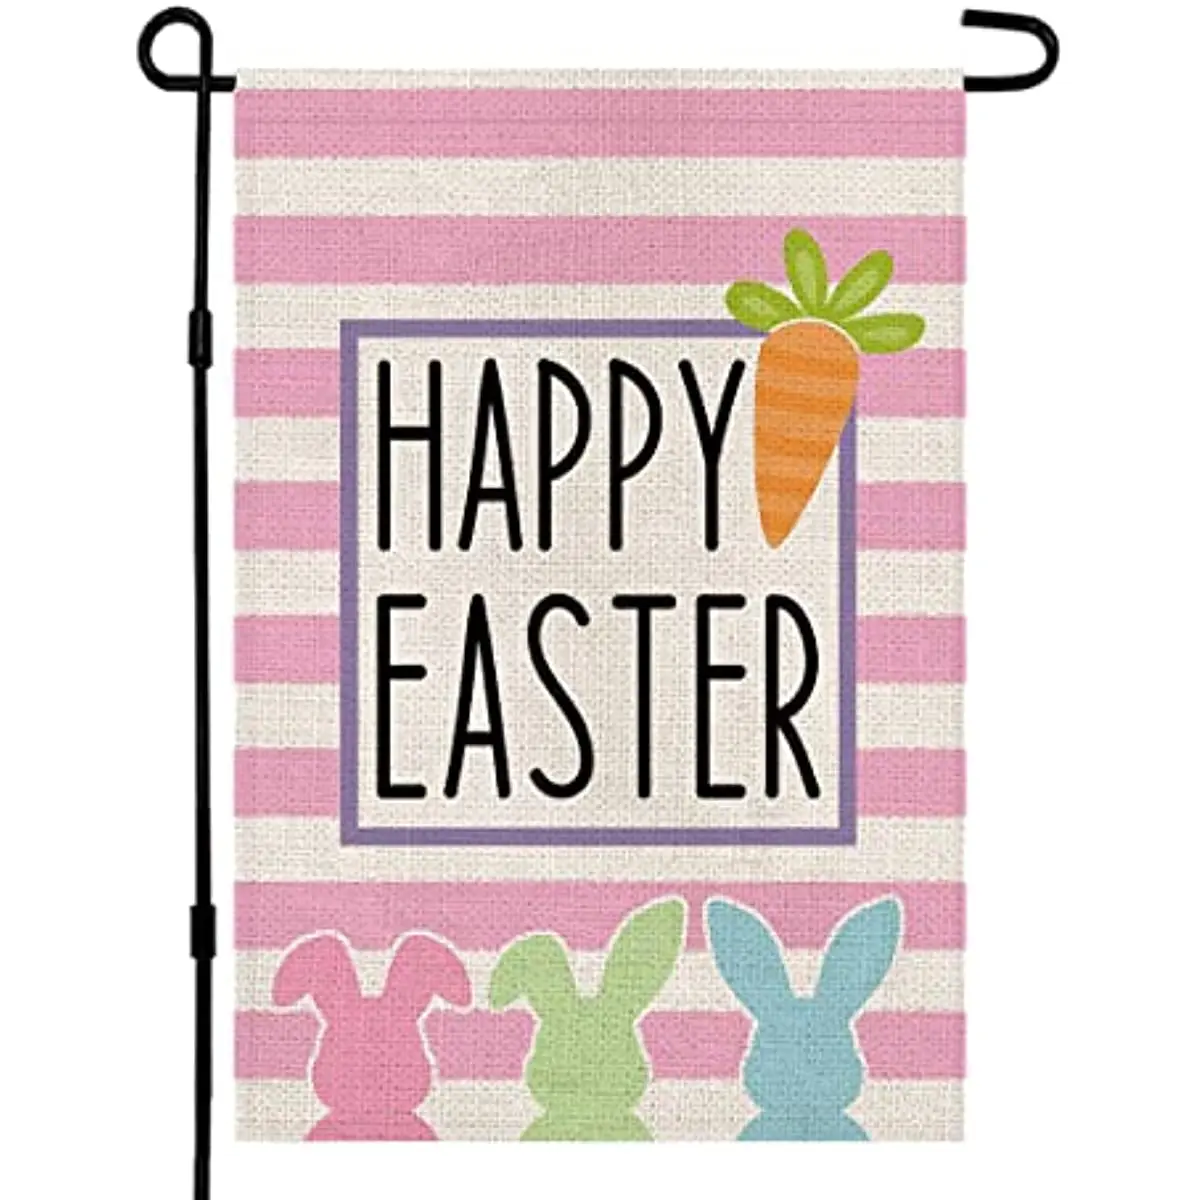 

Pink White Stripe Happy Easter Bunny Garden Flag Double Sided Vertical Burlap 12x18 Inch Rabbit Outdoor Yard Farmhouse Decor